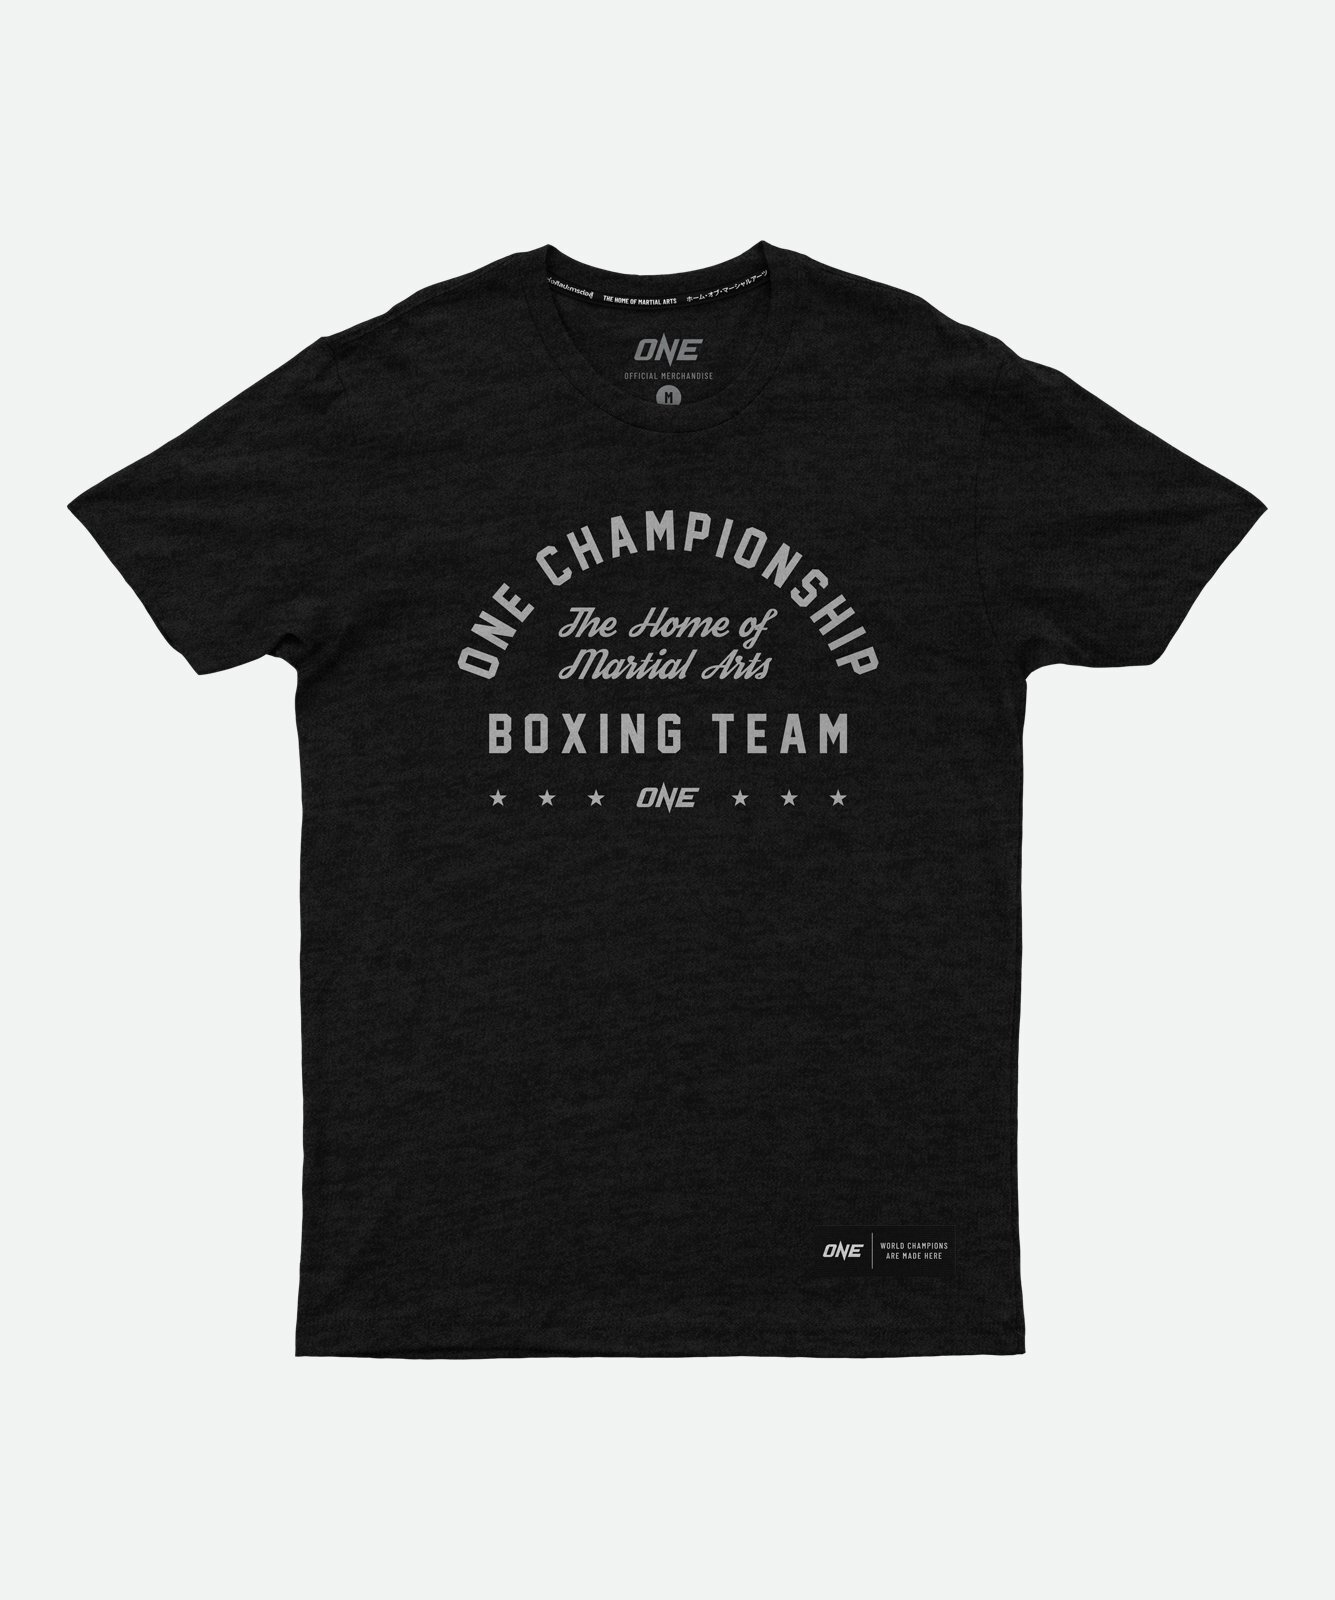 ONE Boxing Team Tee - Extra Small